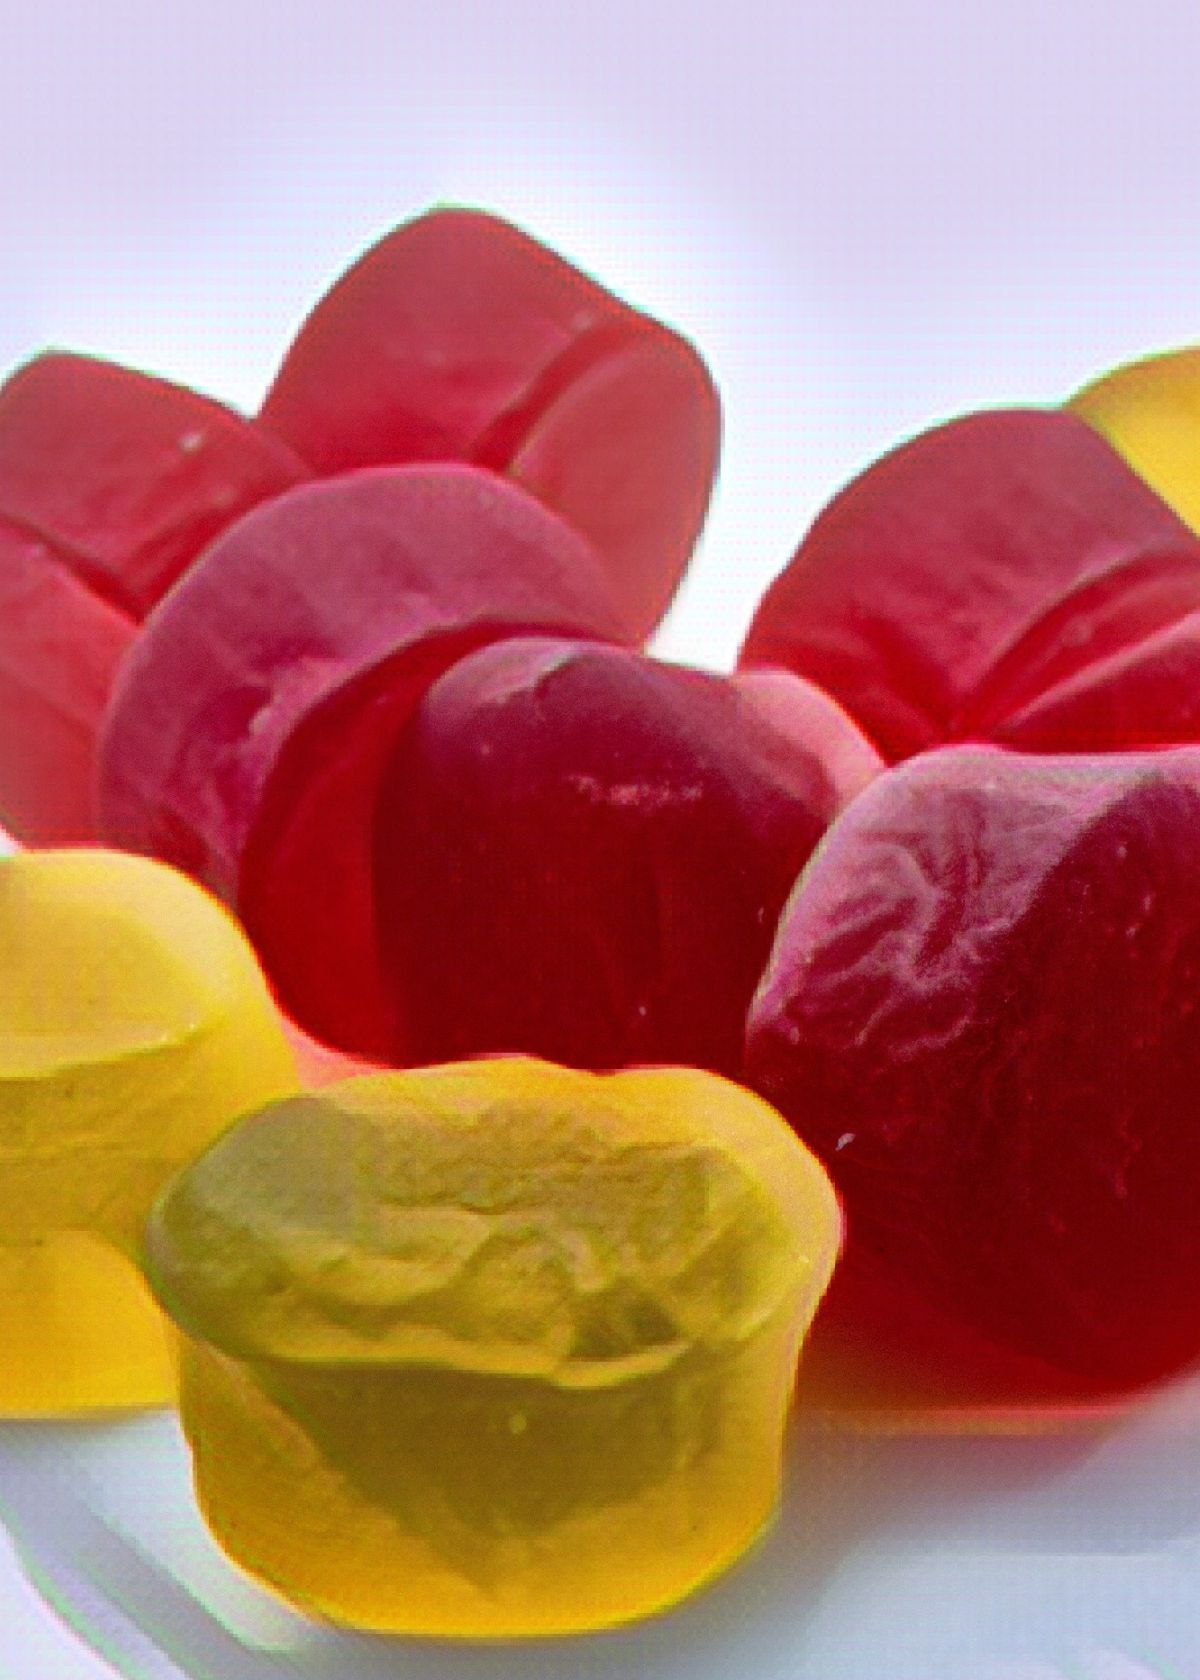 Best Apple Cider Vinegar Gummies That Are Magically Delicious!